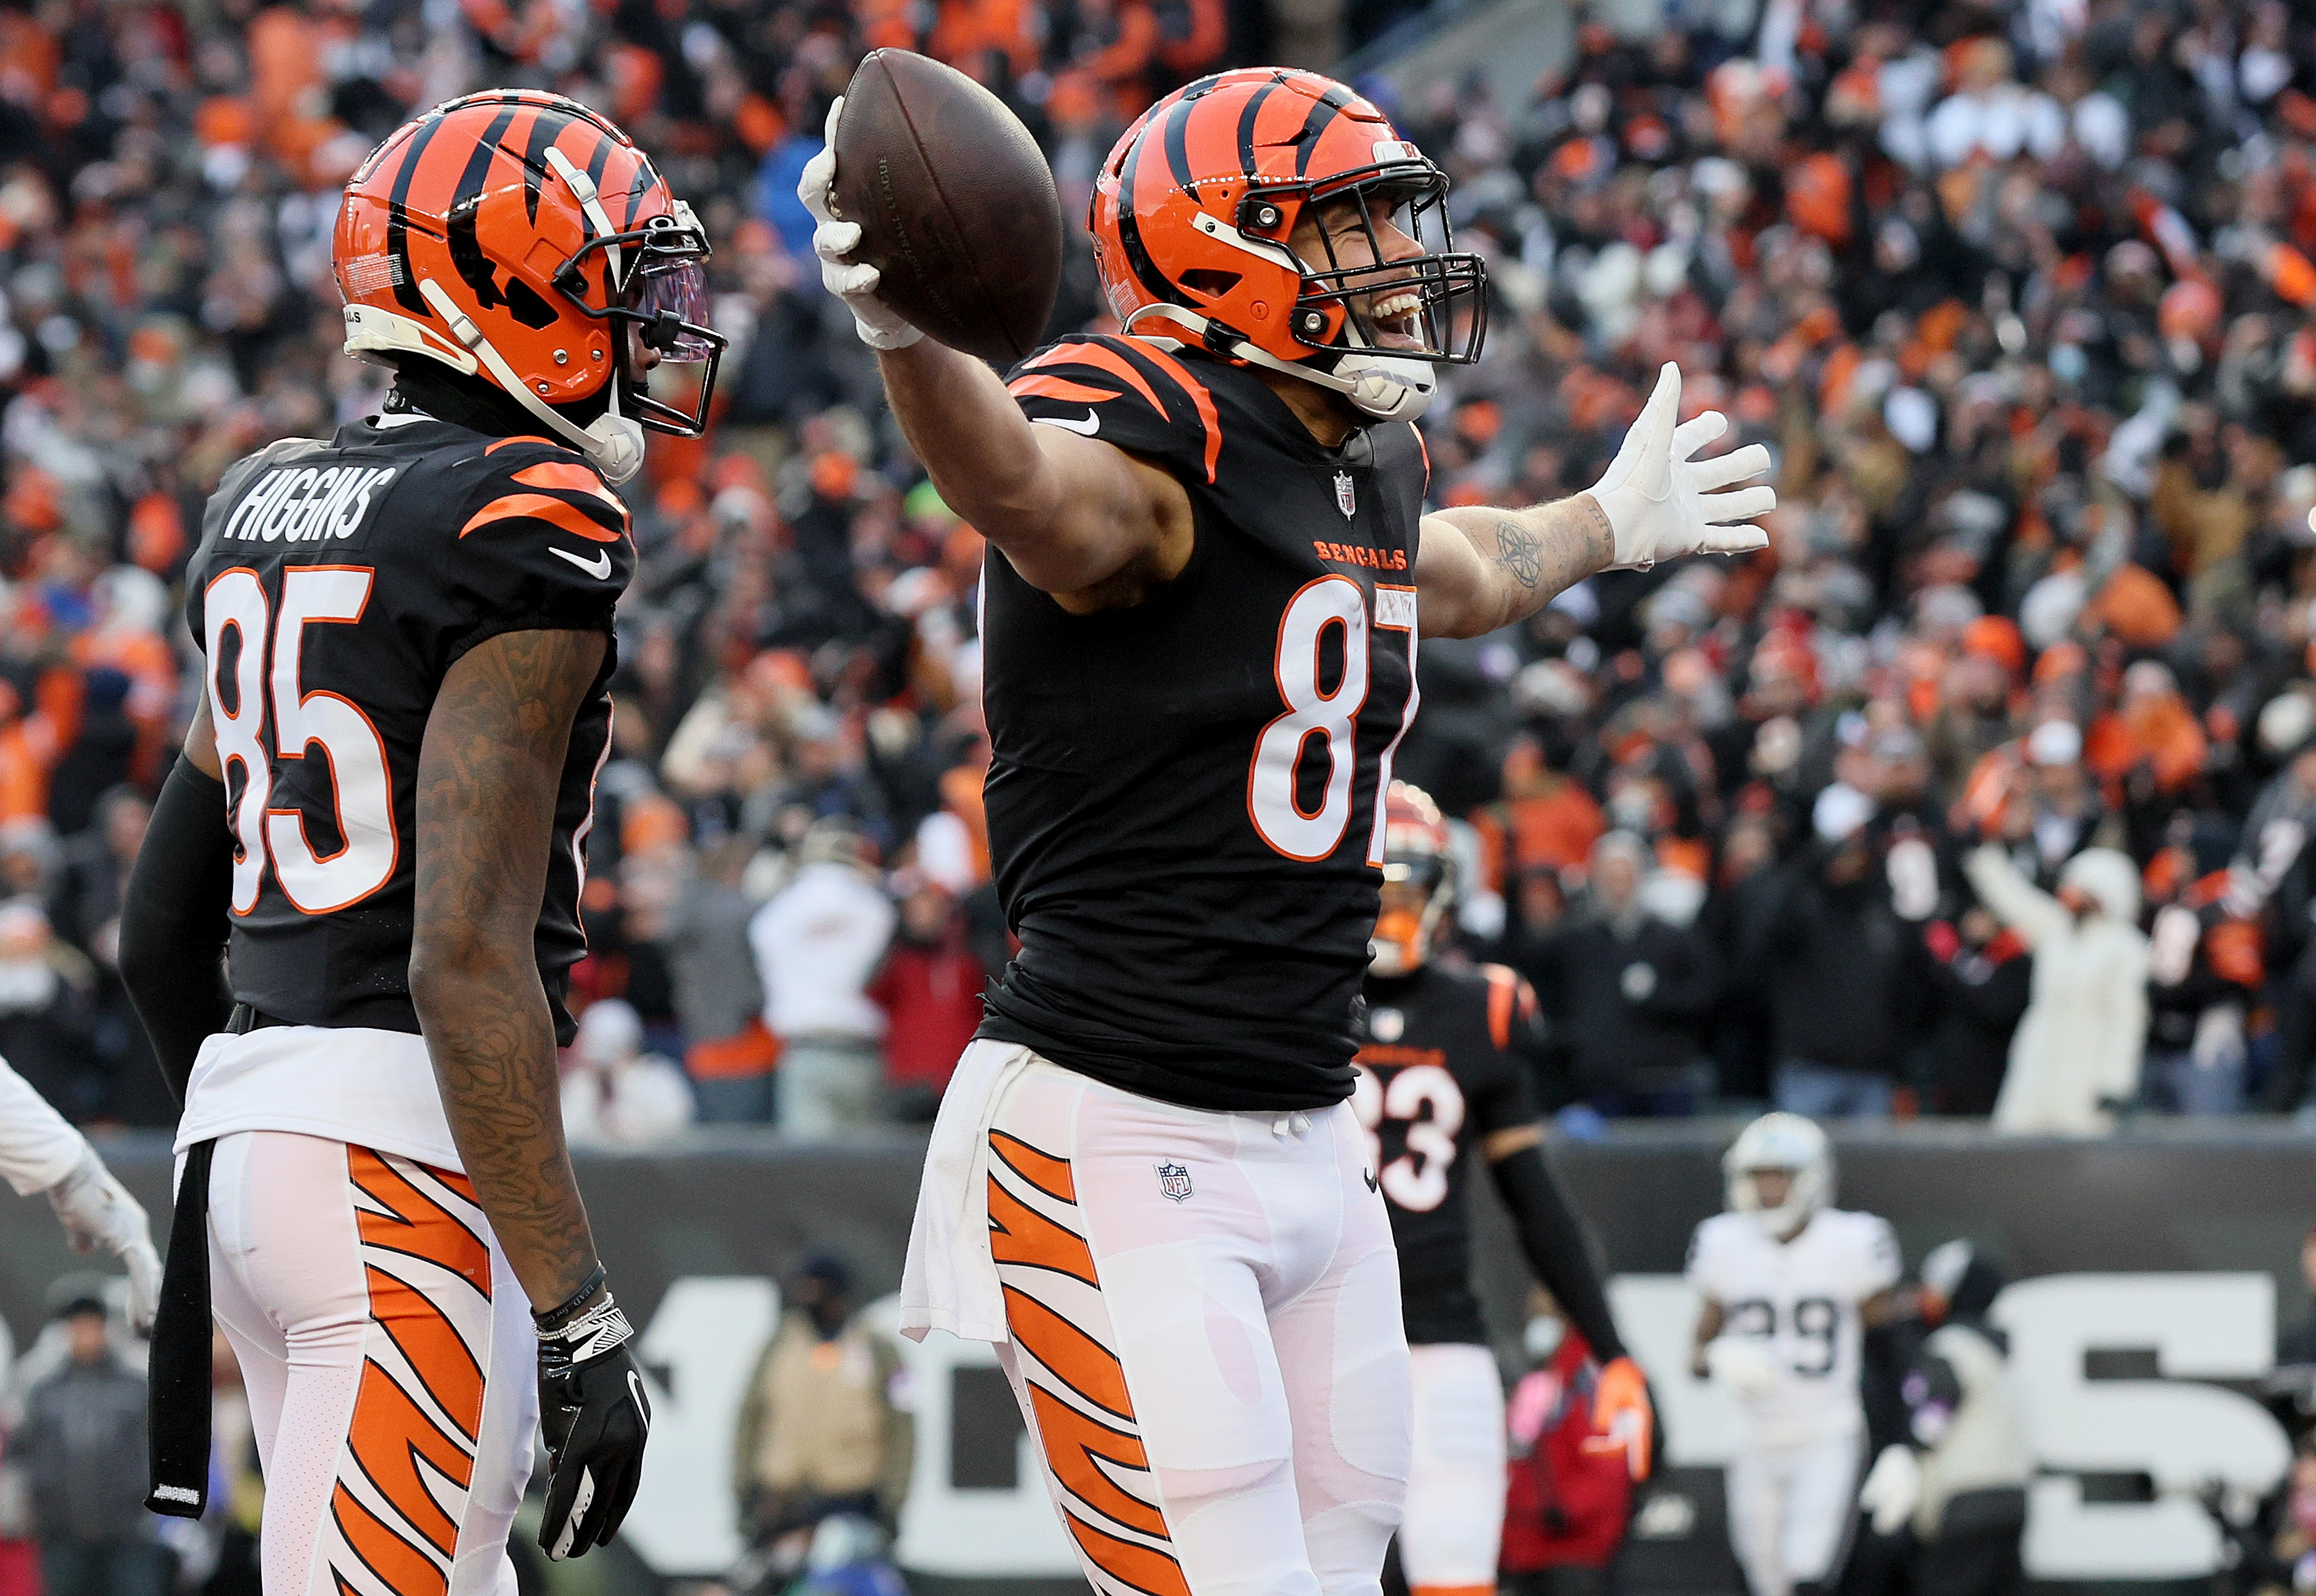 Bengals Fight Song 'Bengals Growl' Will Get Cincinnati Fans Hyped Up for AFC Championship